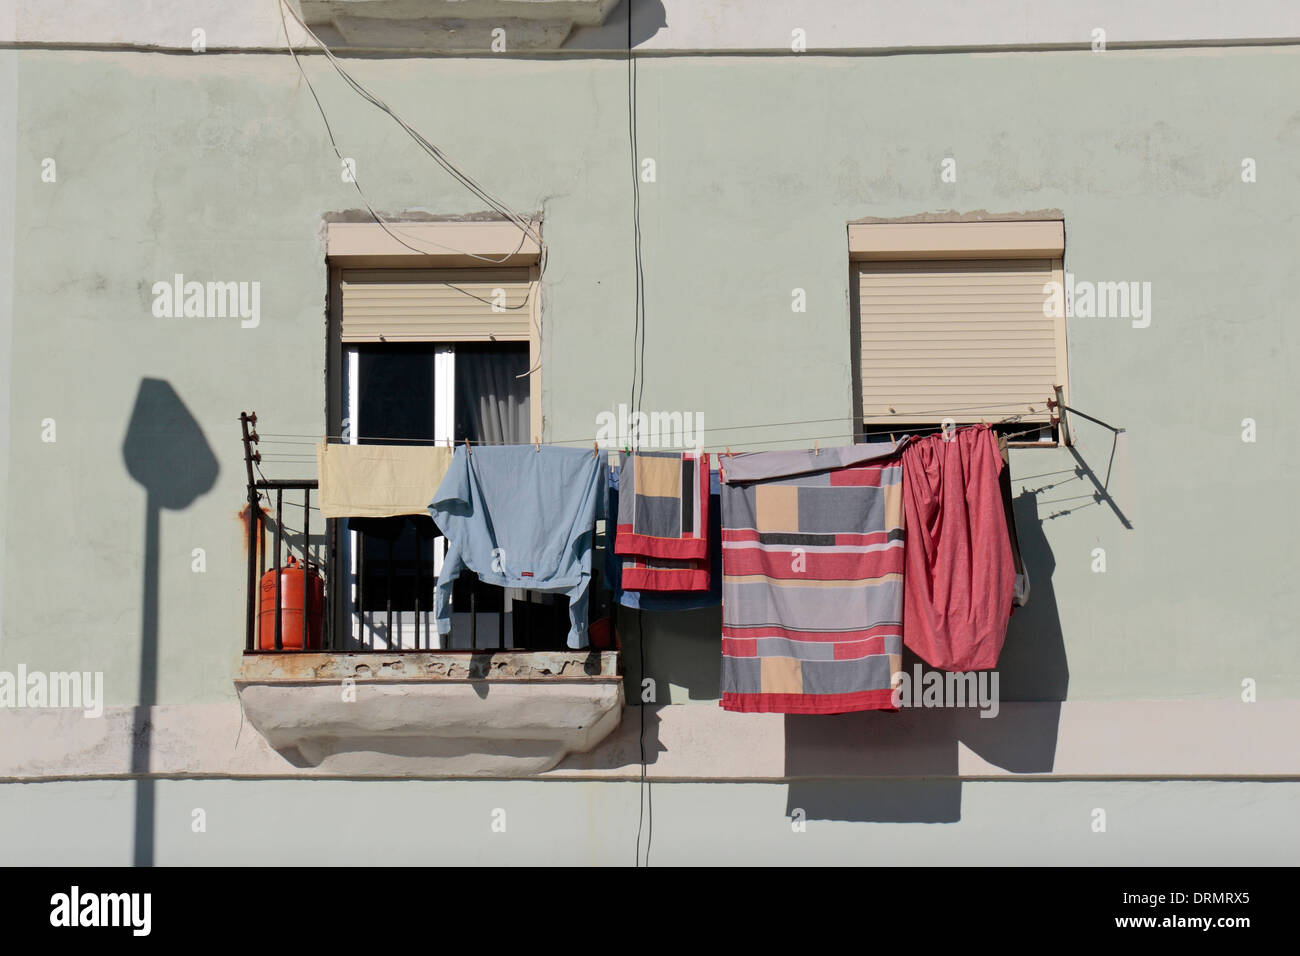 Laundry Hanging Clothes Line Outside Window Stock Photo 1416298787